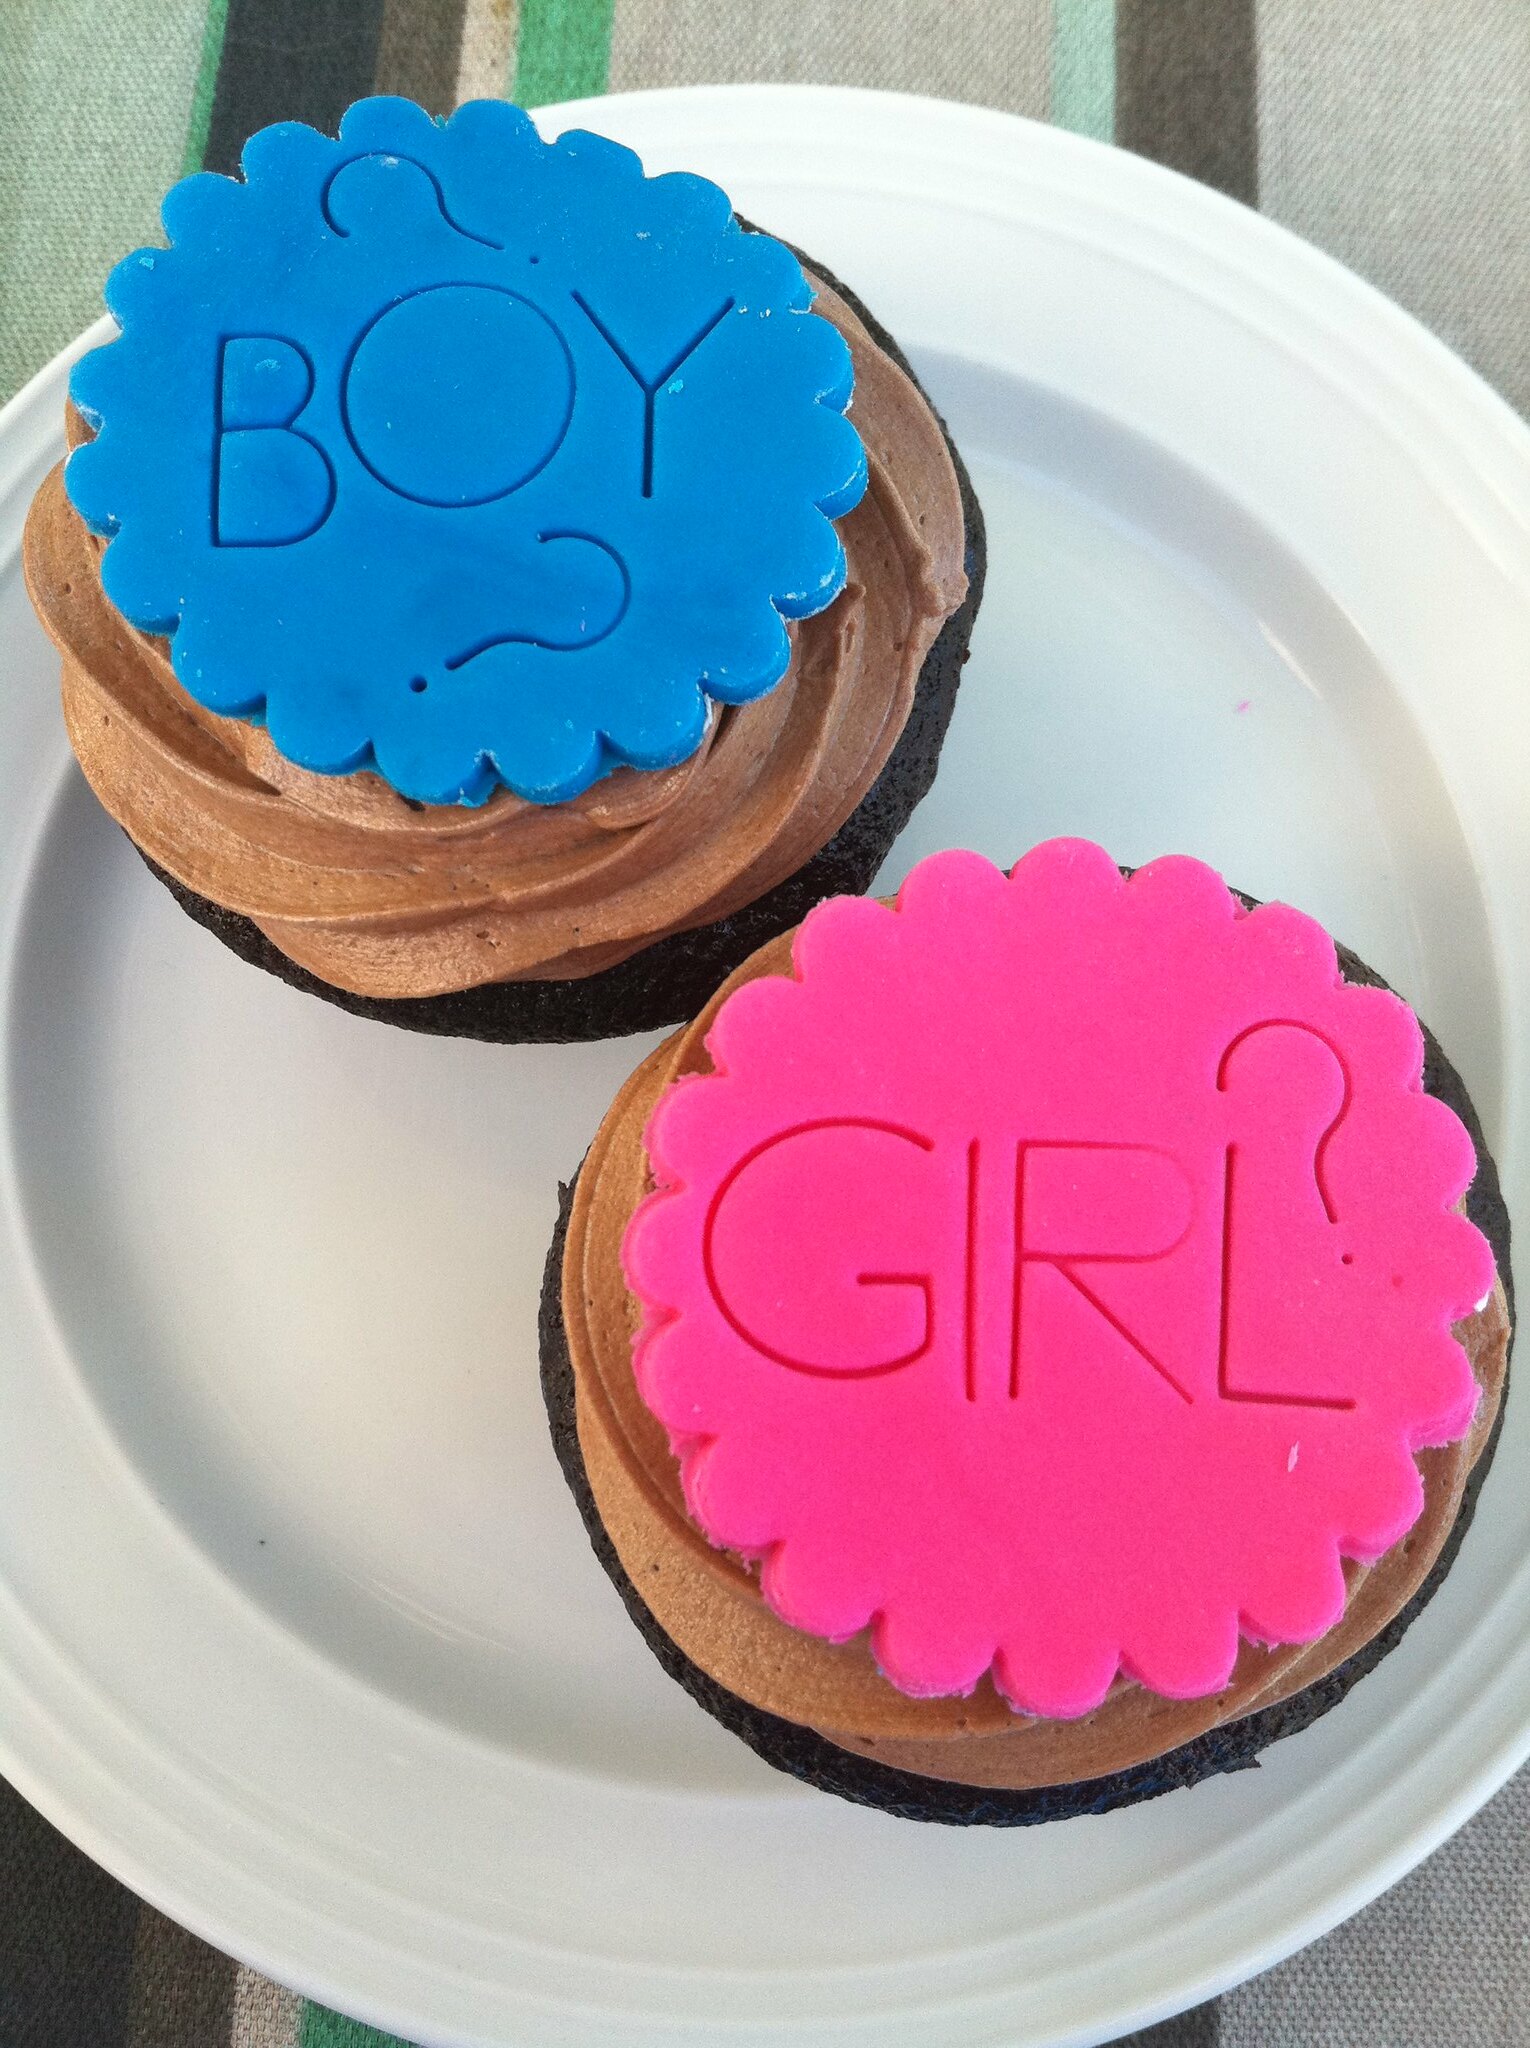 Closeup photo of two cupcakes. One is decored in blue with the word BOY, the other decorated in pink with the word GIRL.